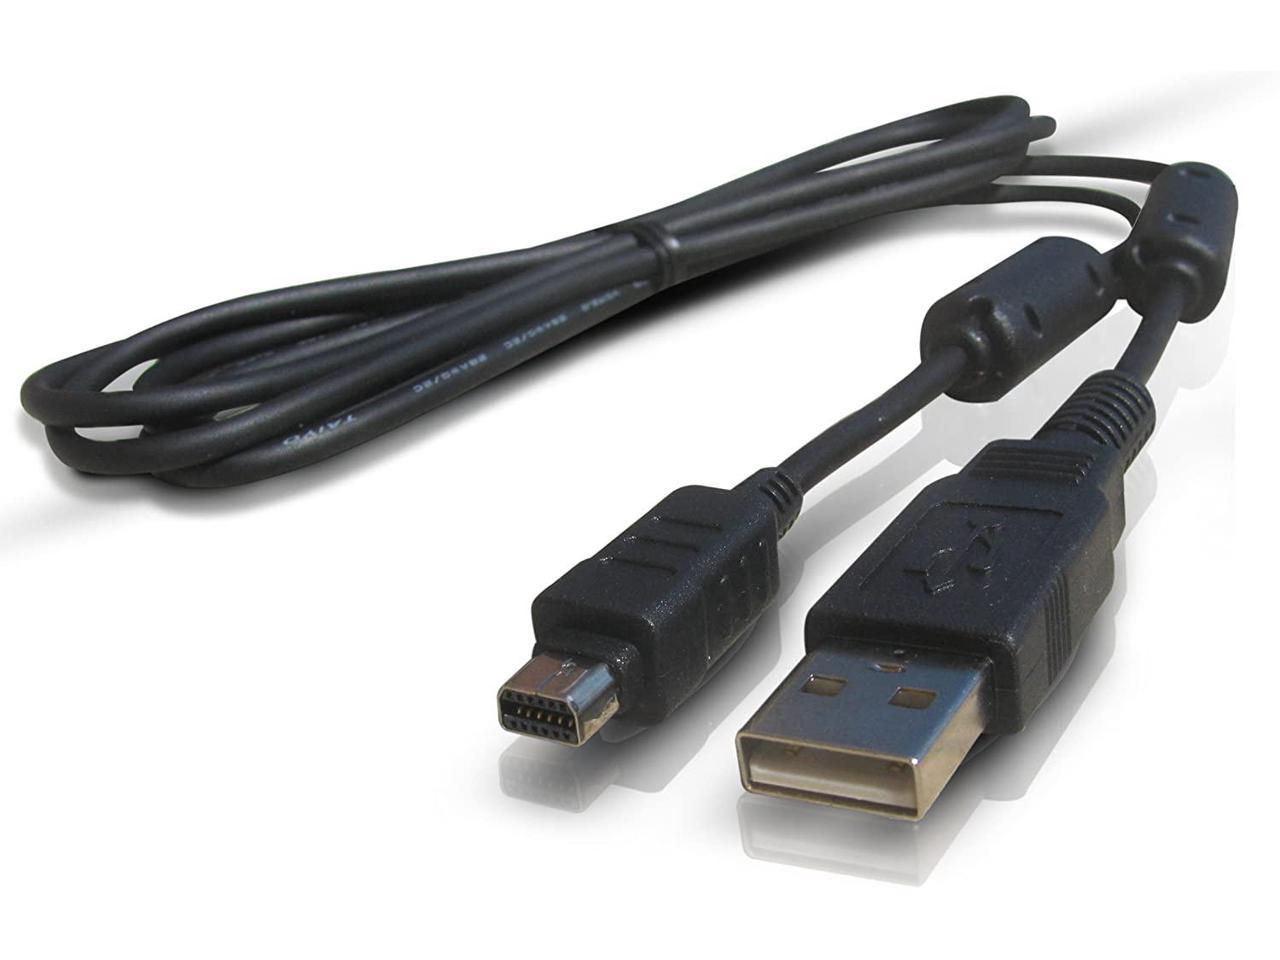 Olympus Camedia C-770 Ultra Zoom CAMERA REPLACEMENT USB DATA SYNC CABLE/LEAD 